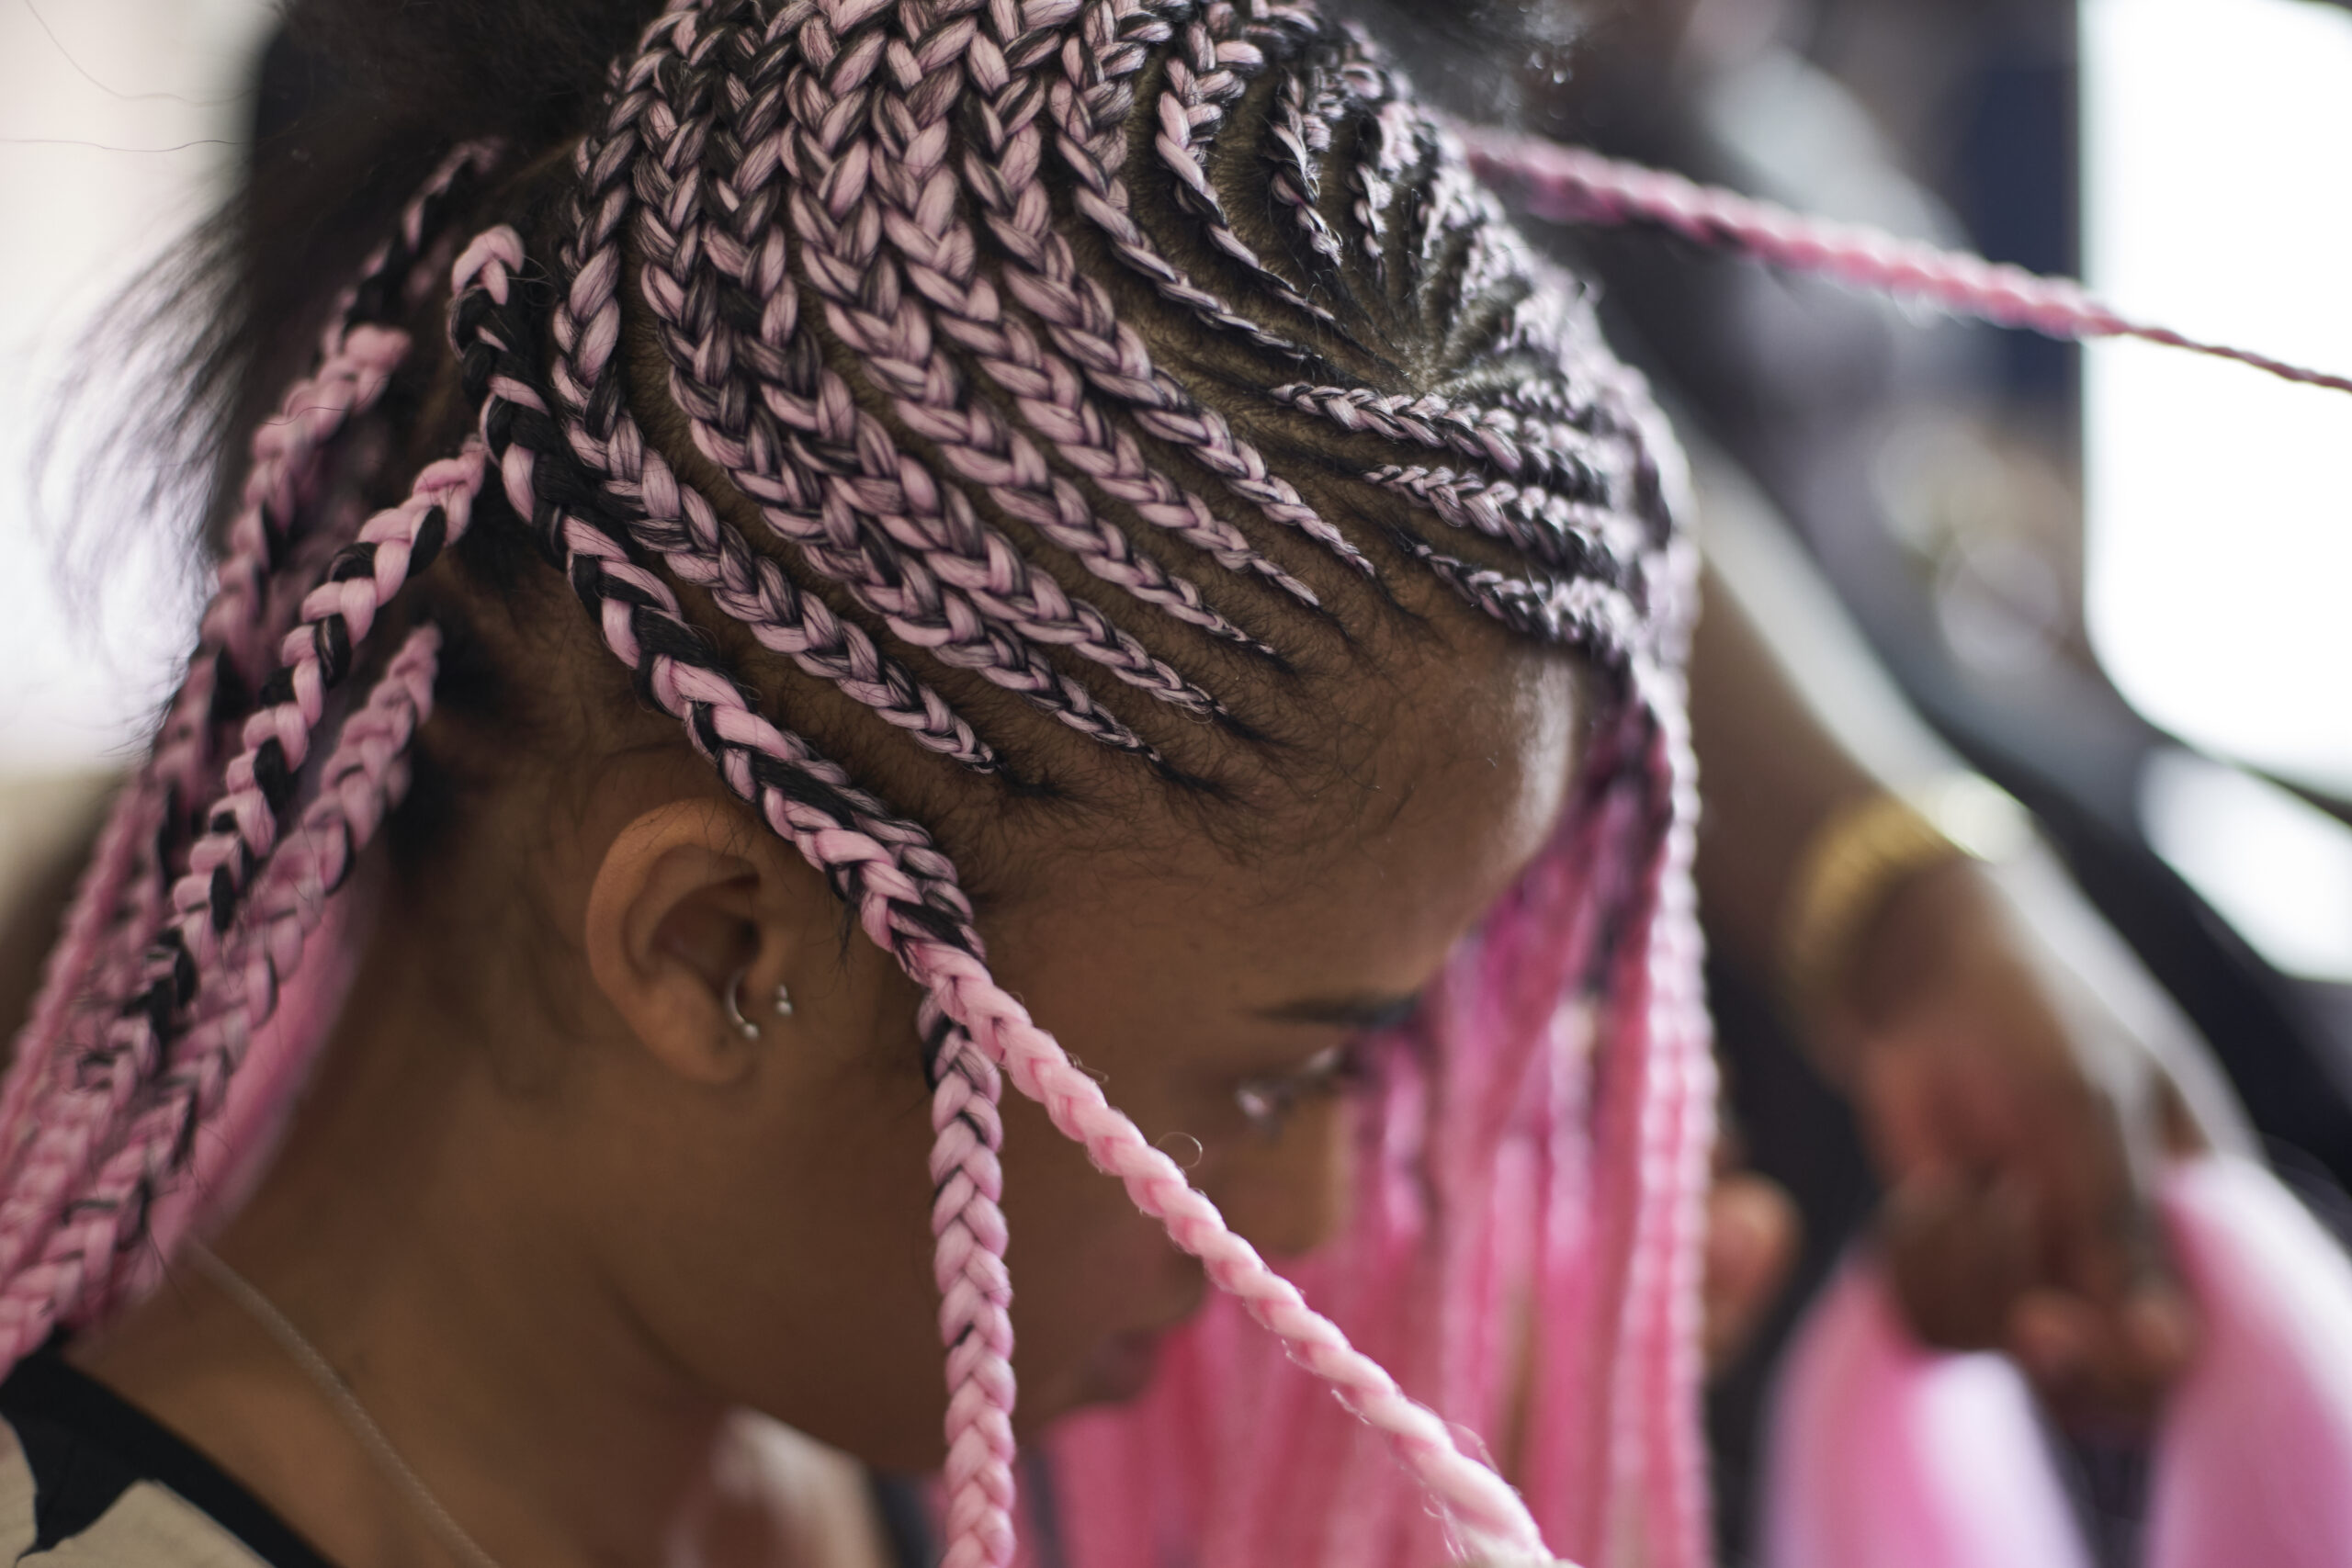 Young woman with pink braids, close-up